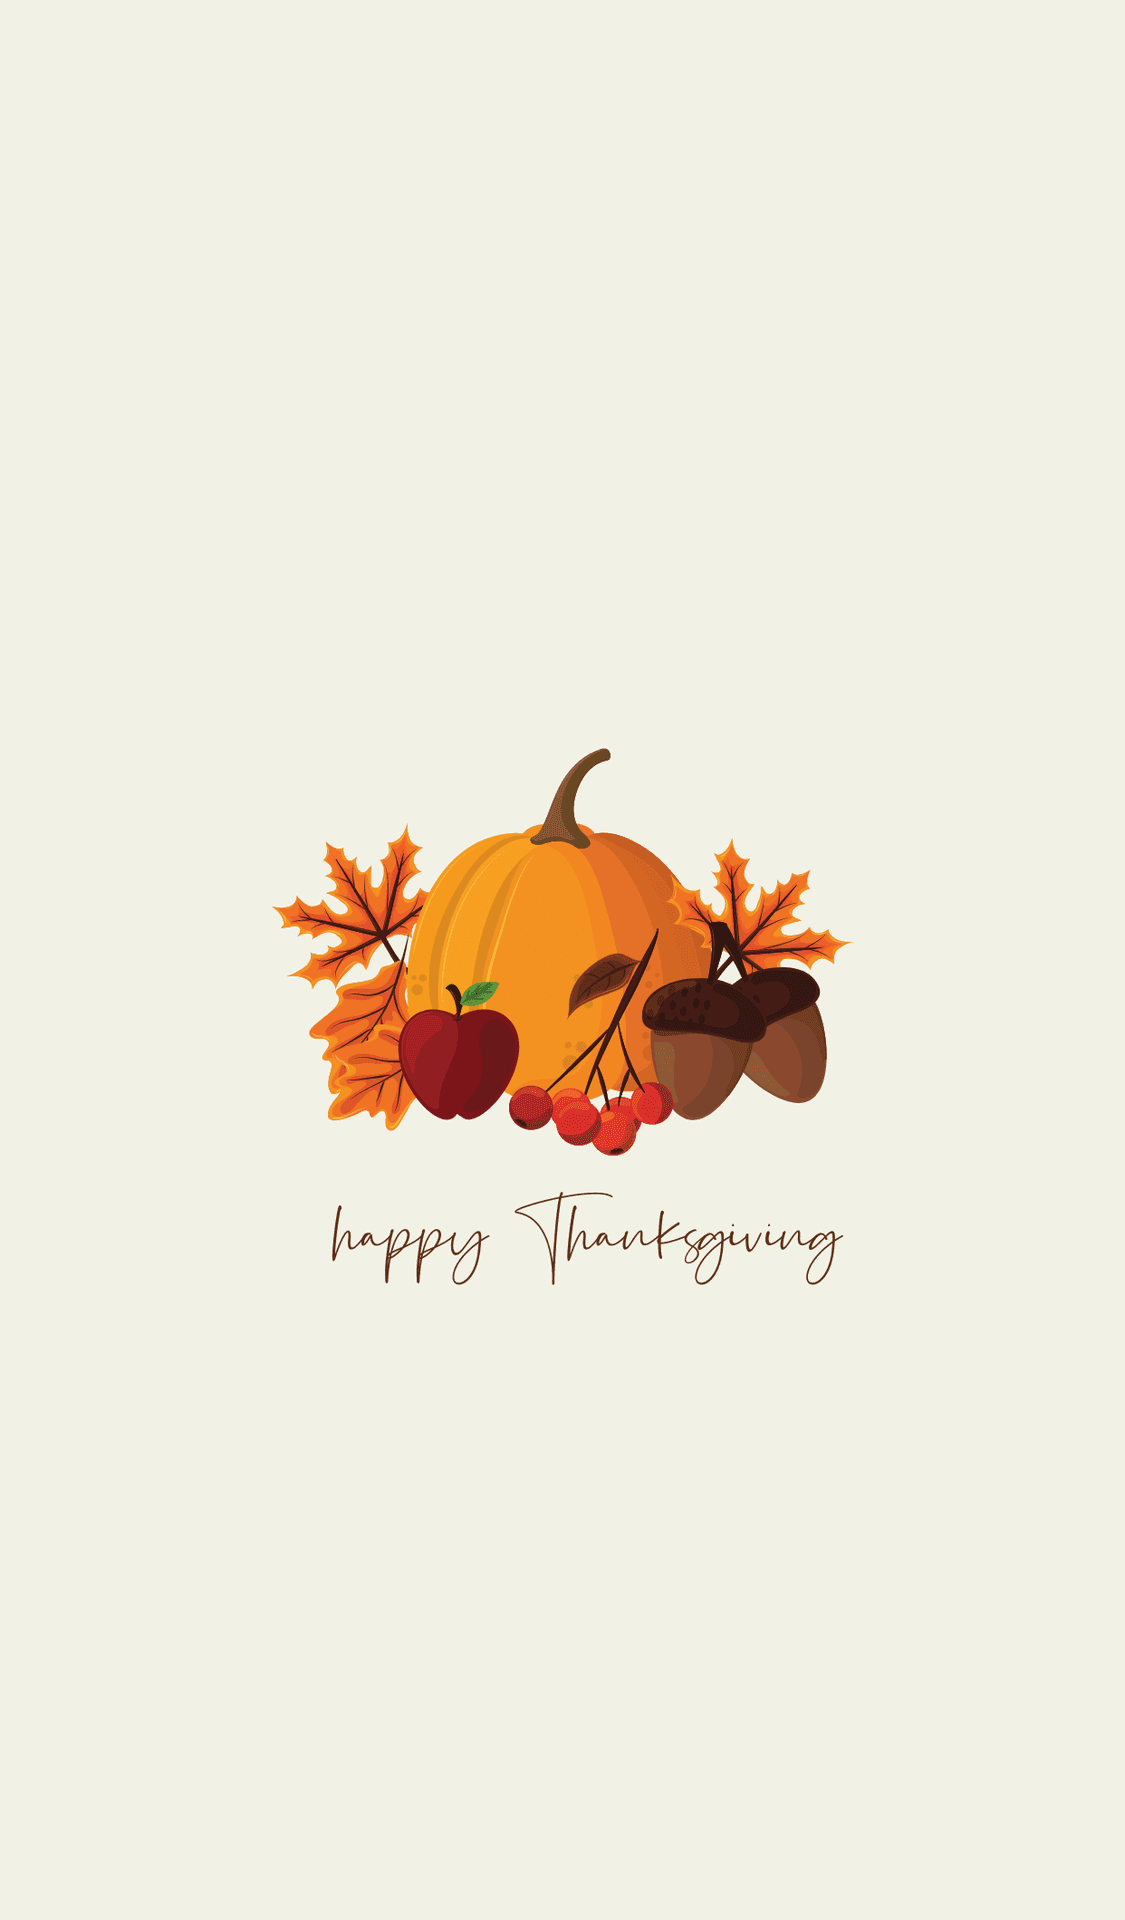 Warm And Festive Thanksgiving Background